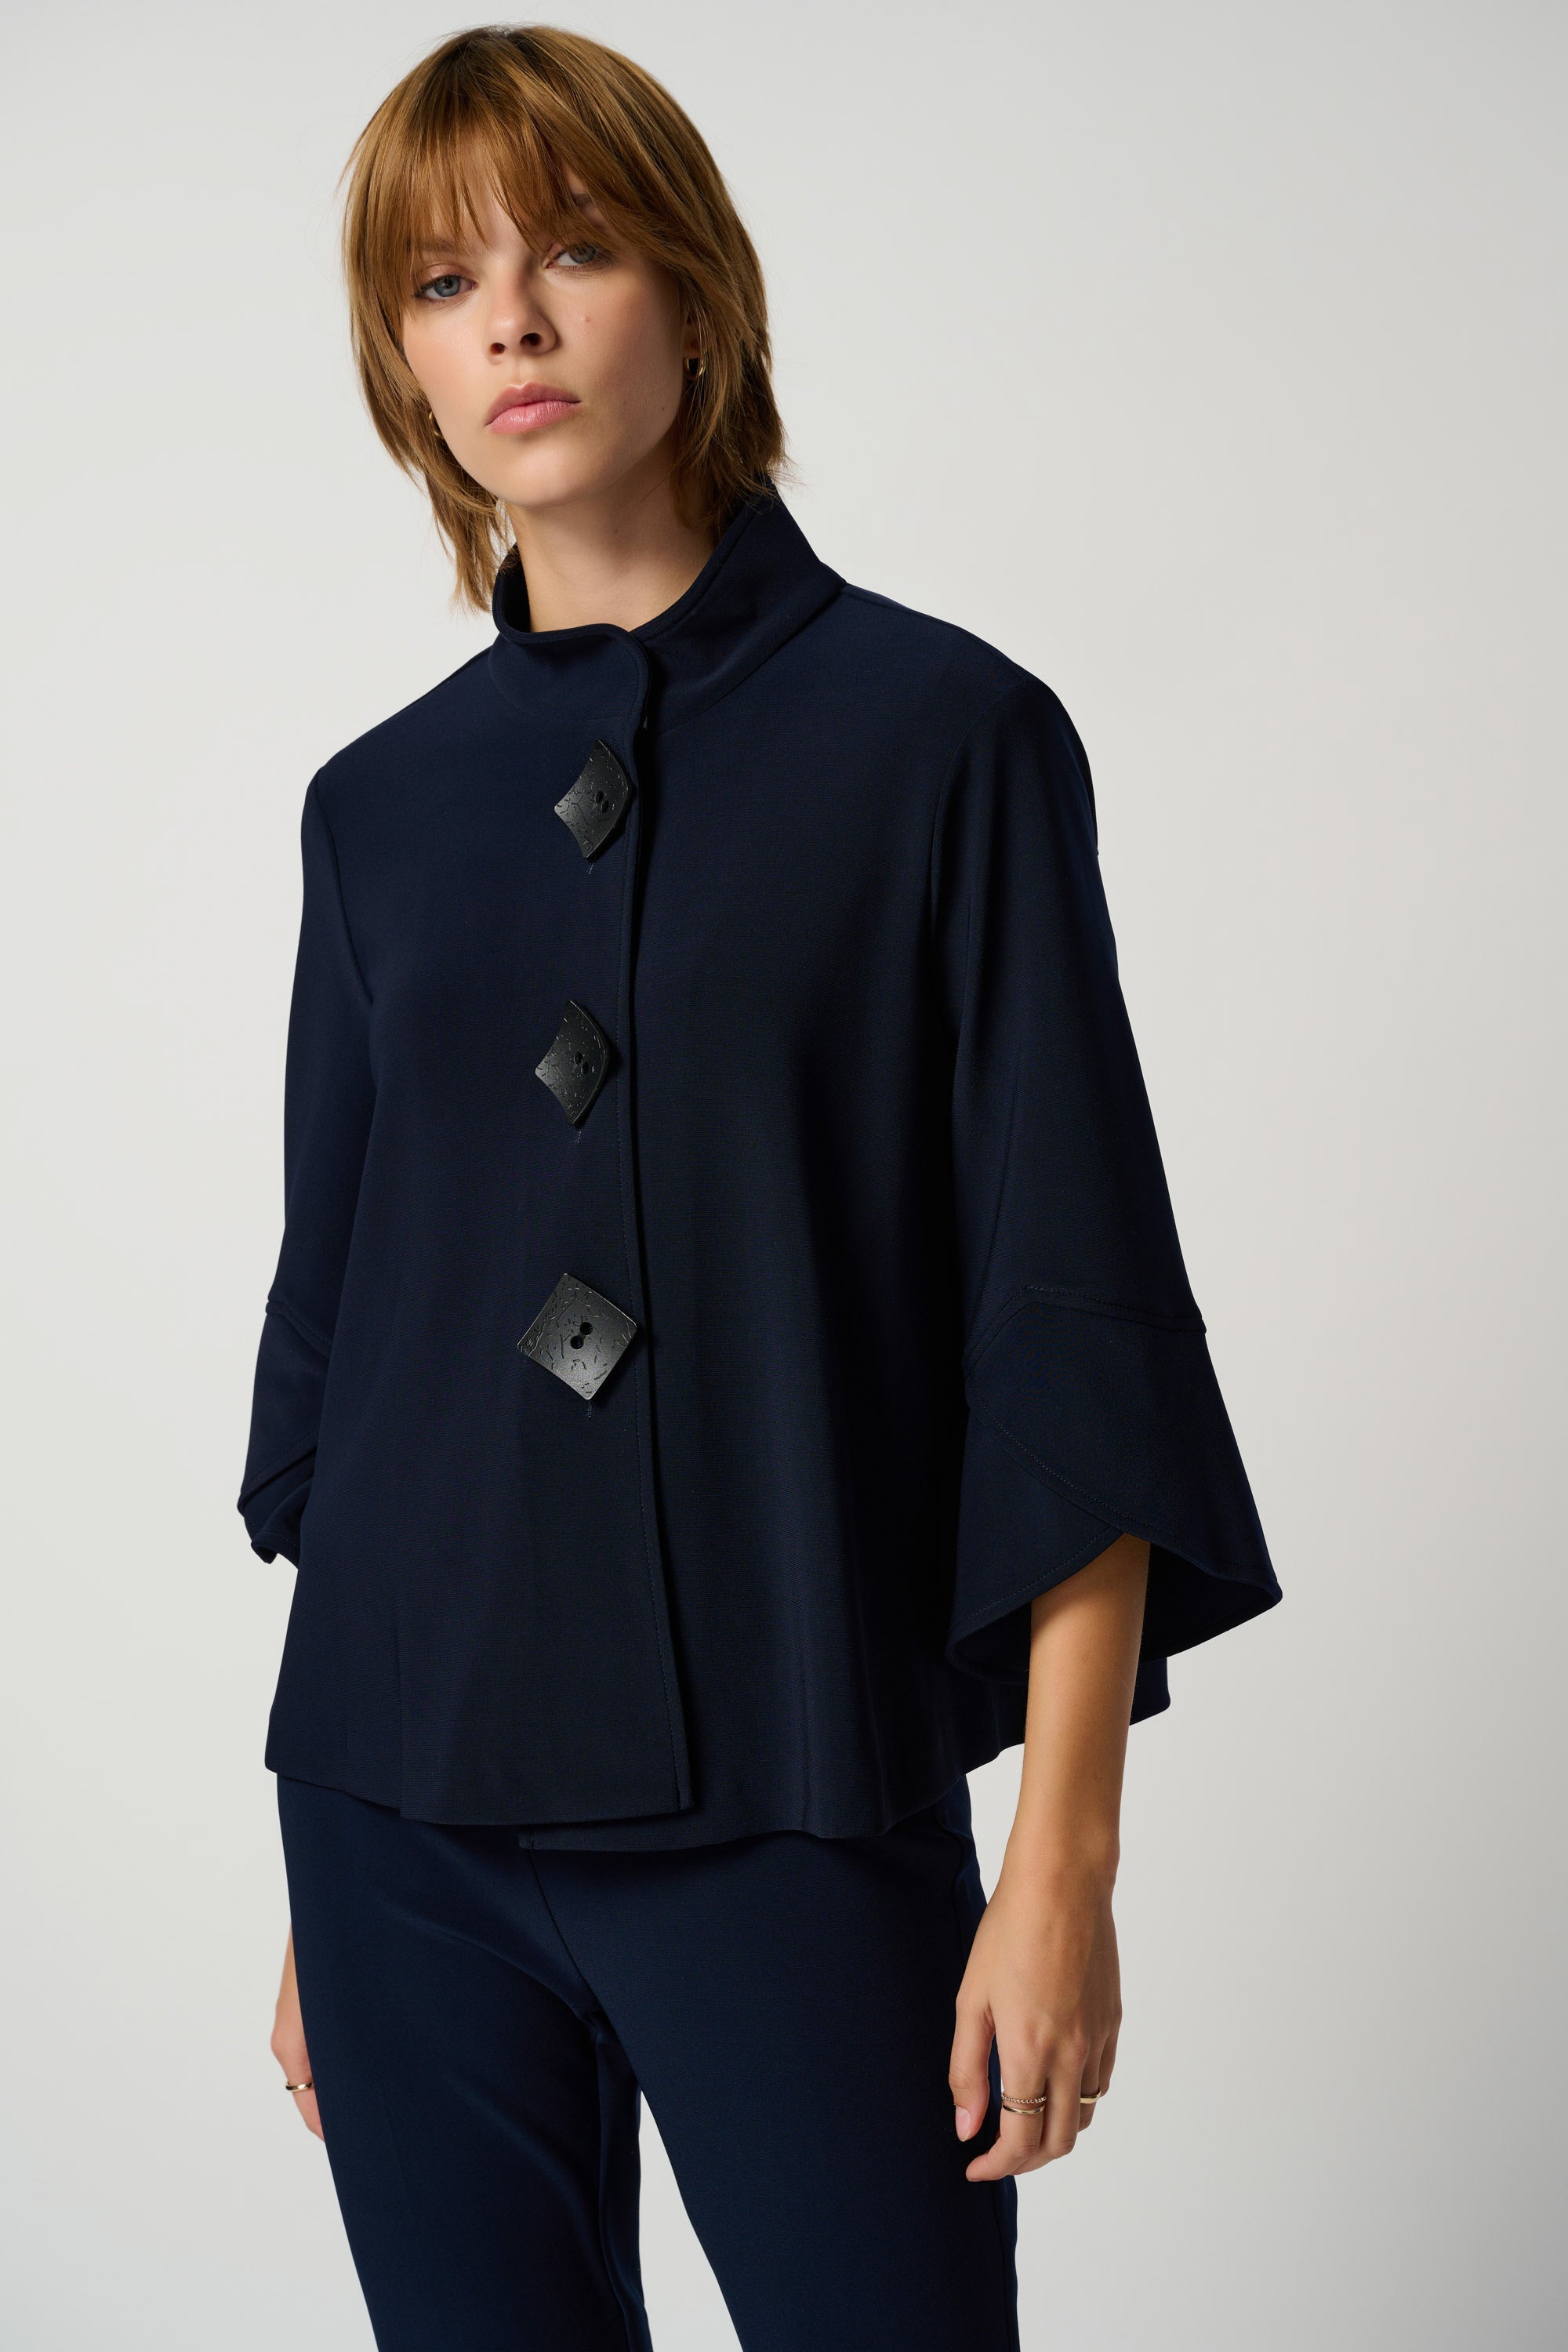 Joseph Ribkoff (193198NOS) Women's 3/4 Sleeve Classic Trapeze Jacket with Stand Collar & Statement Button in Midnight Navy Blue